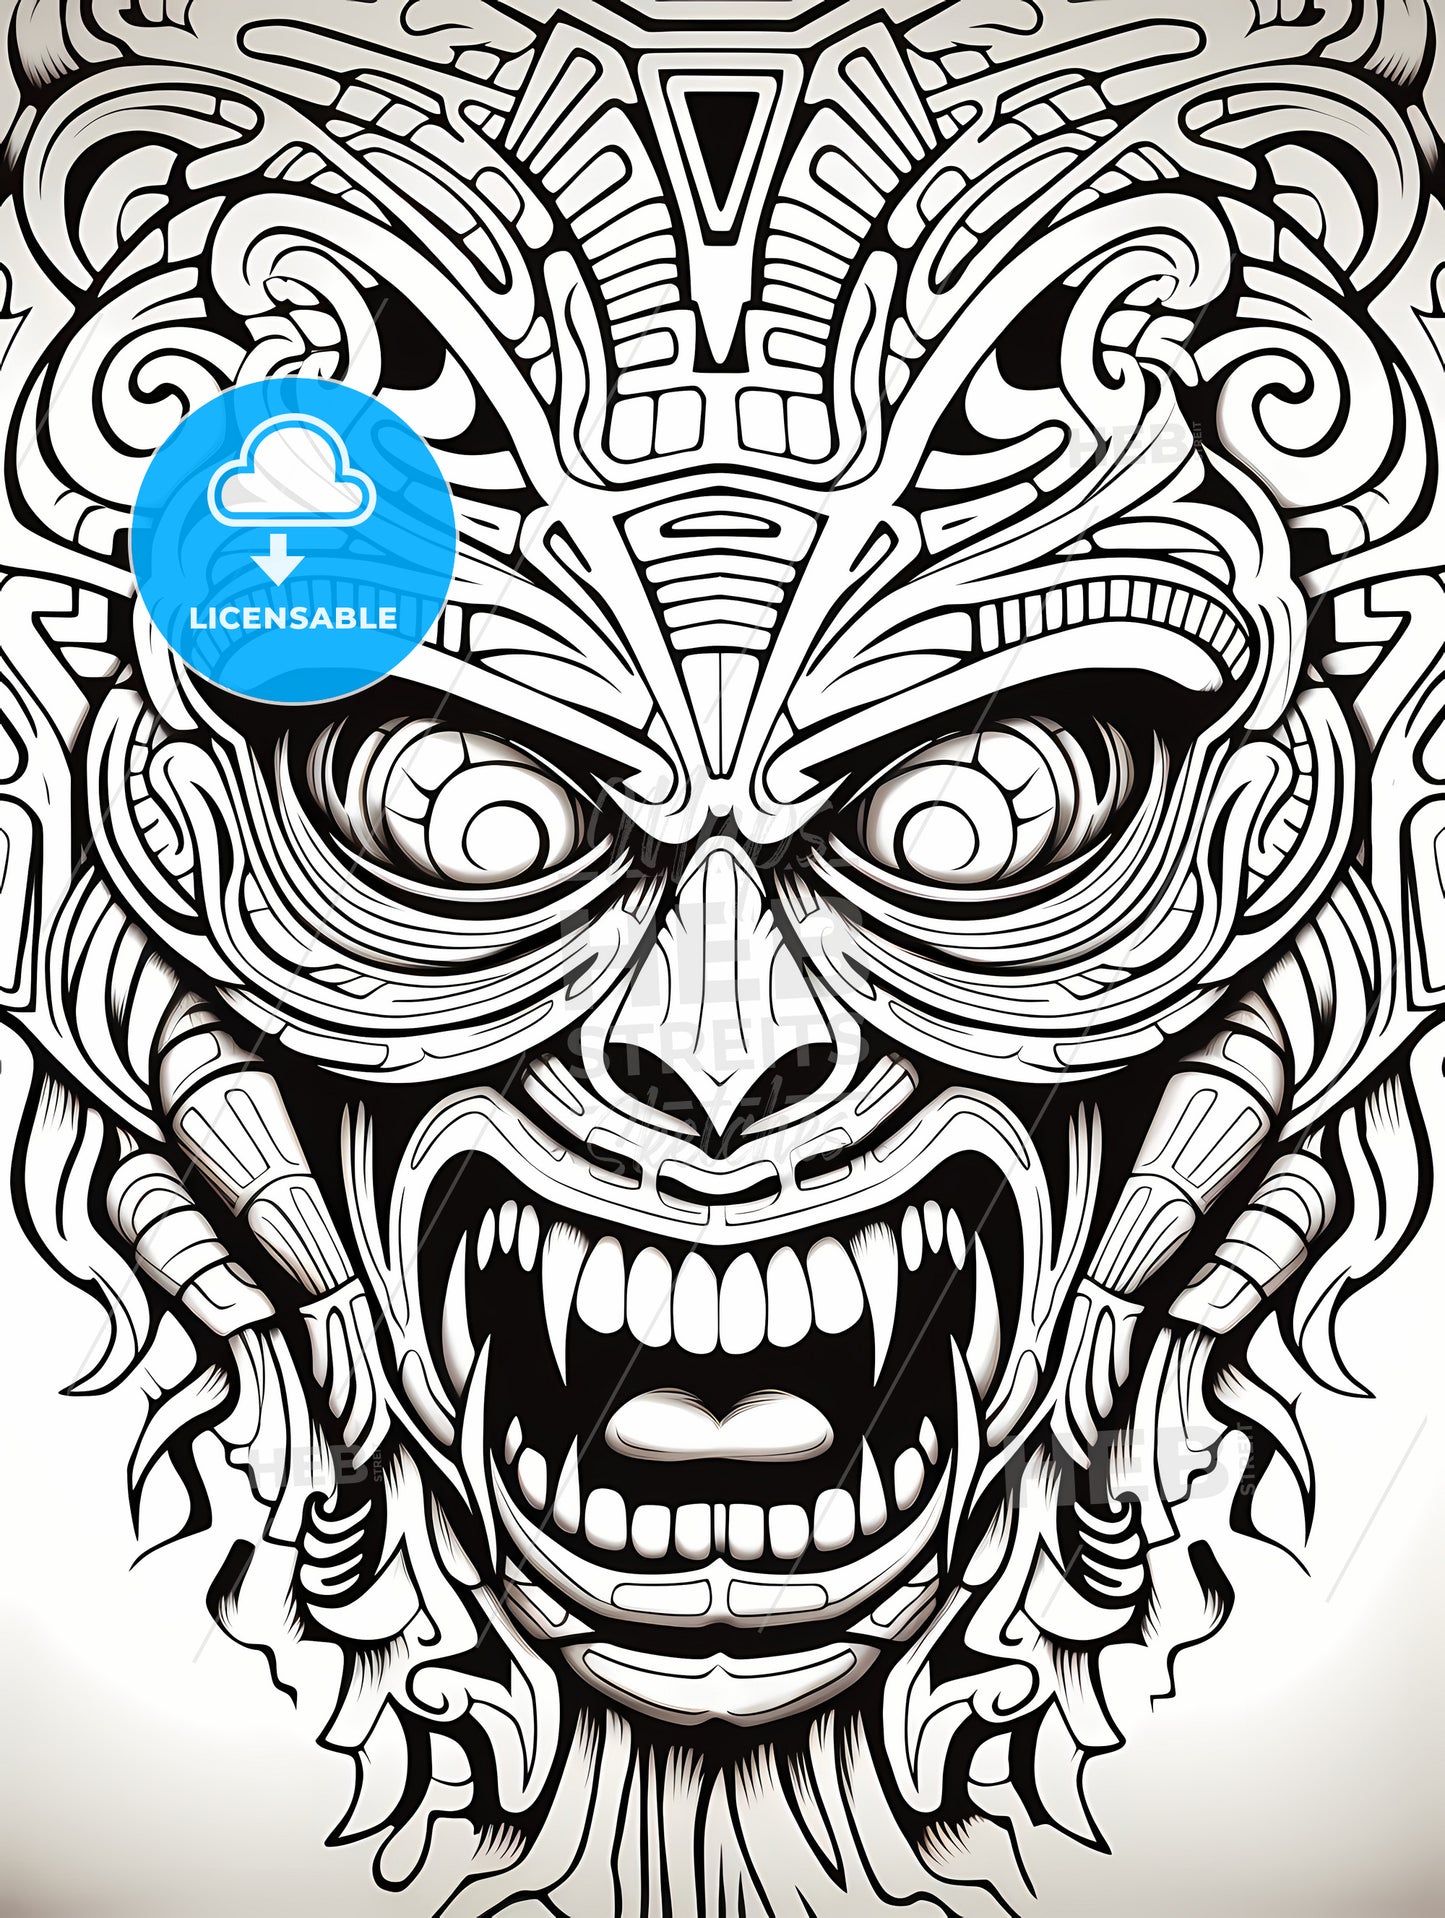 Coloring Book - A Black And White Drawing Of A Monster Face